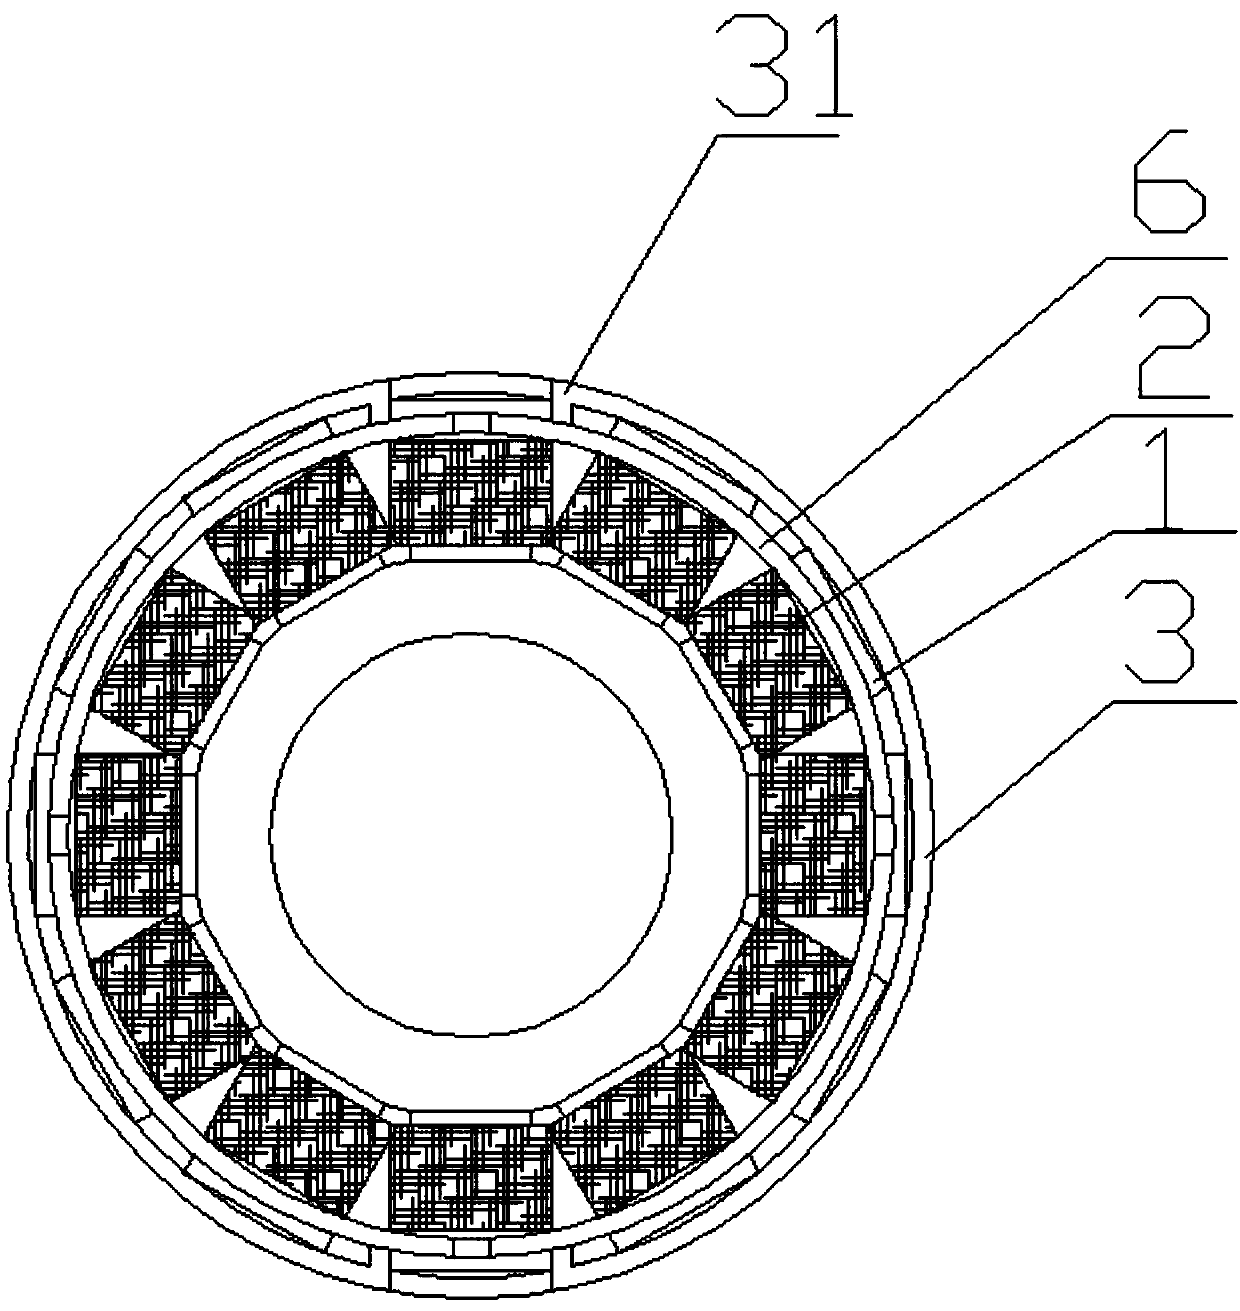 Heat dissipation structure of motor stator